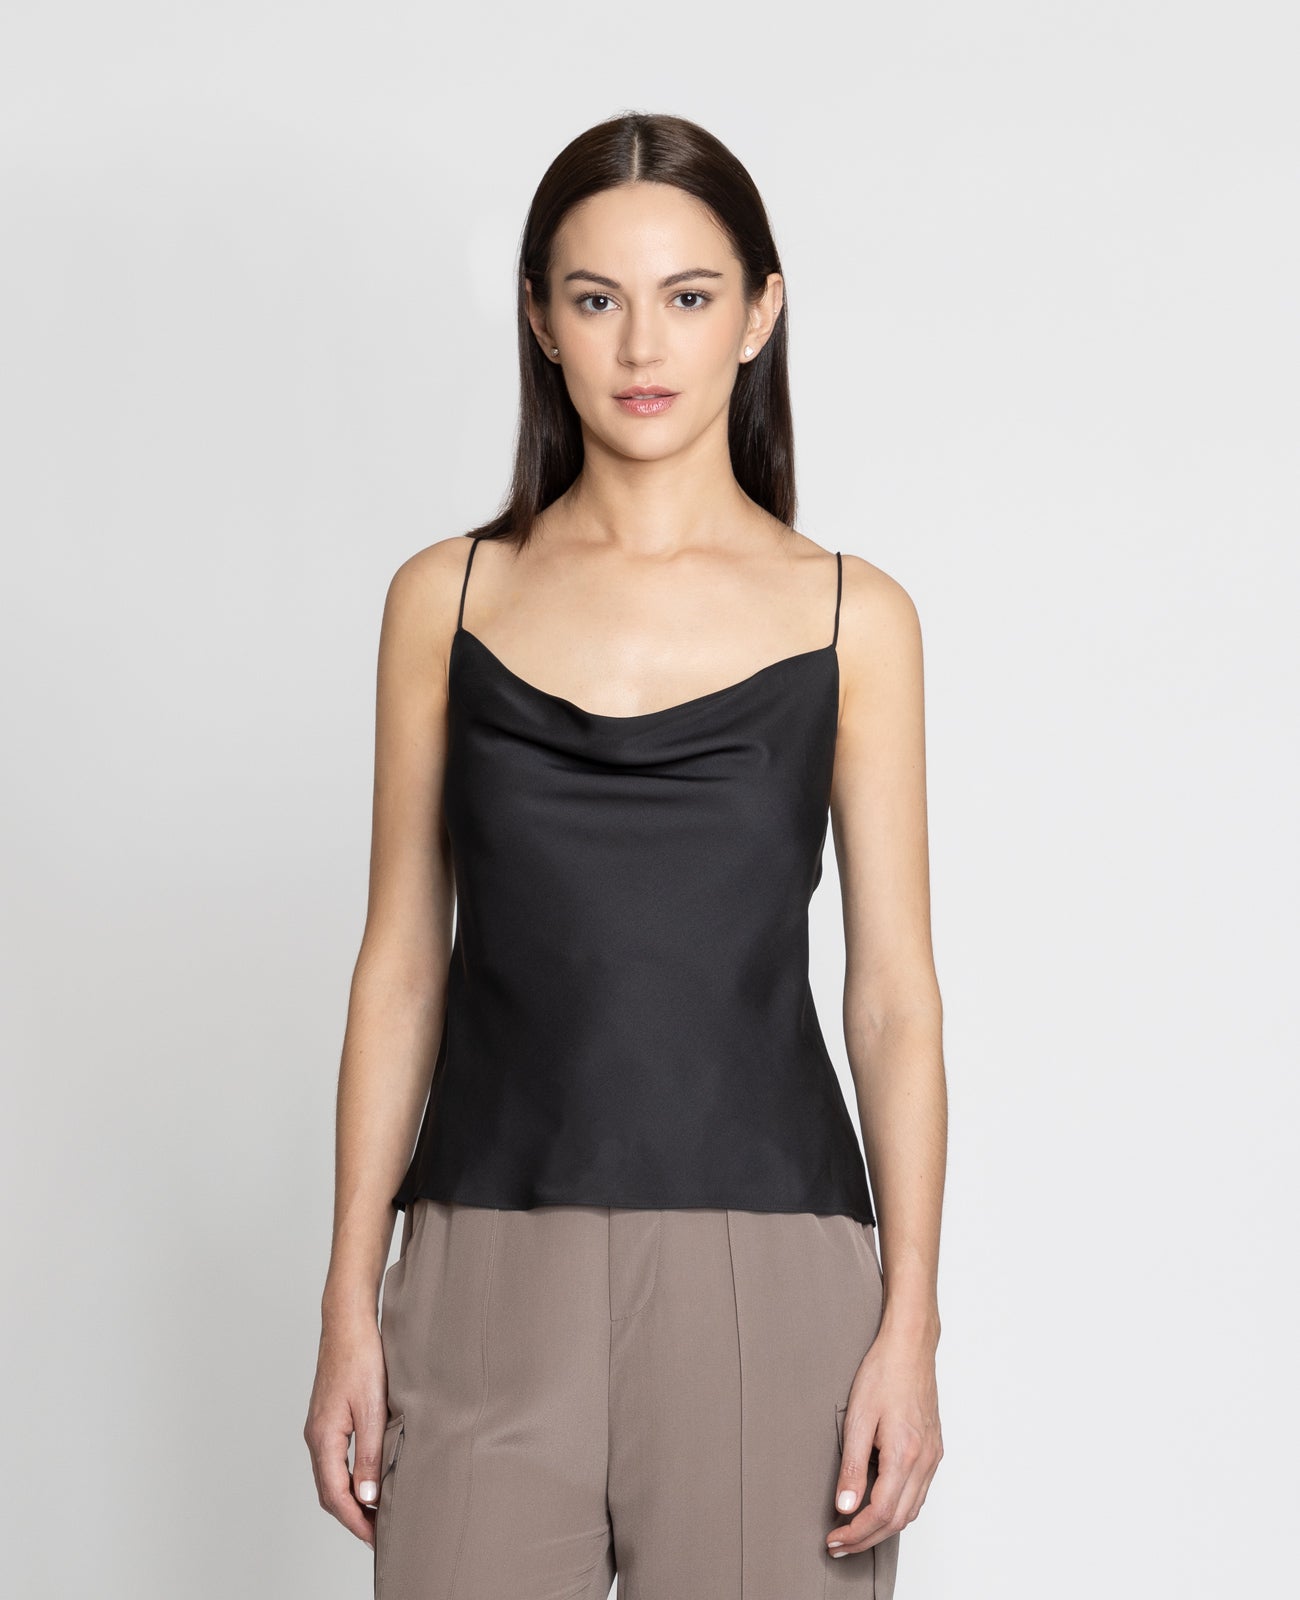 Women's Satin V-Neck Cami Top Online India, Snazzyway